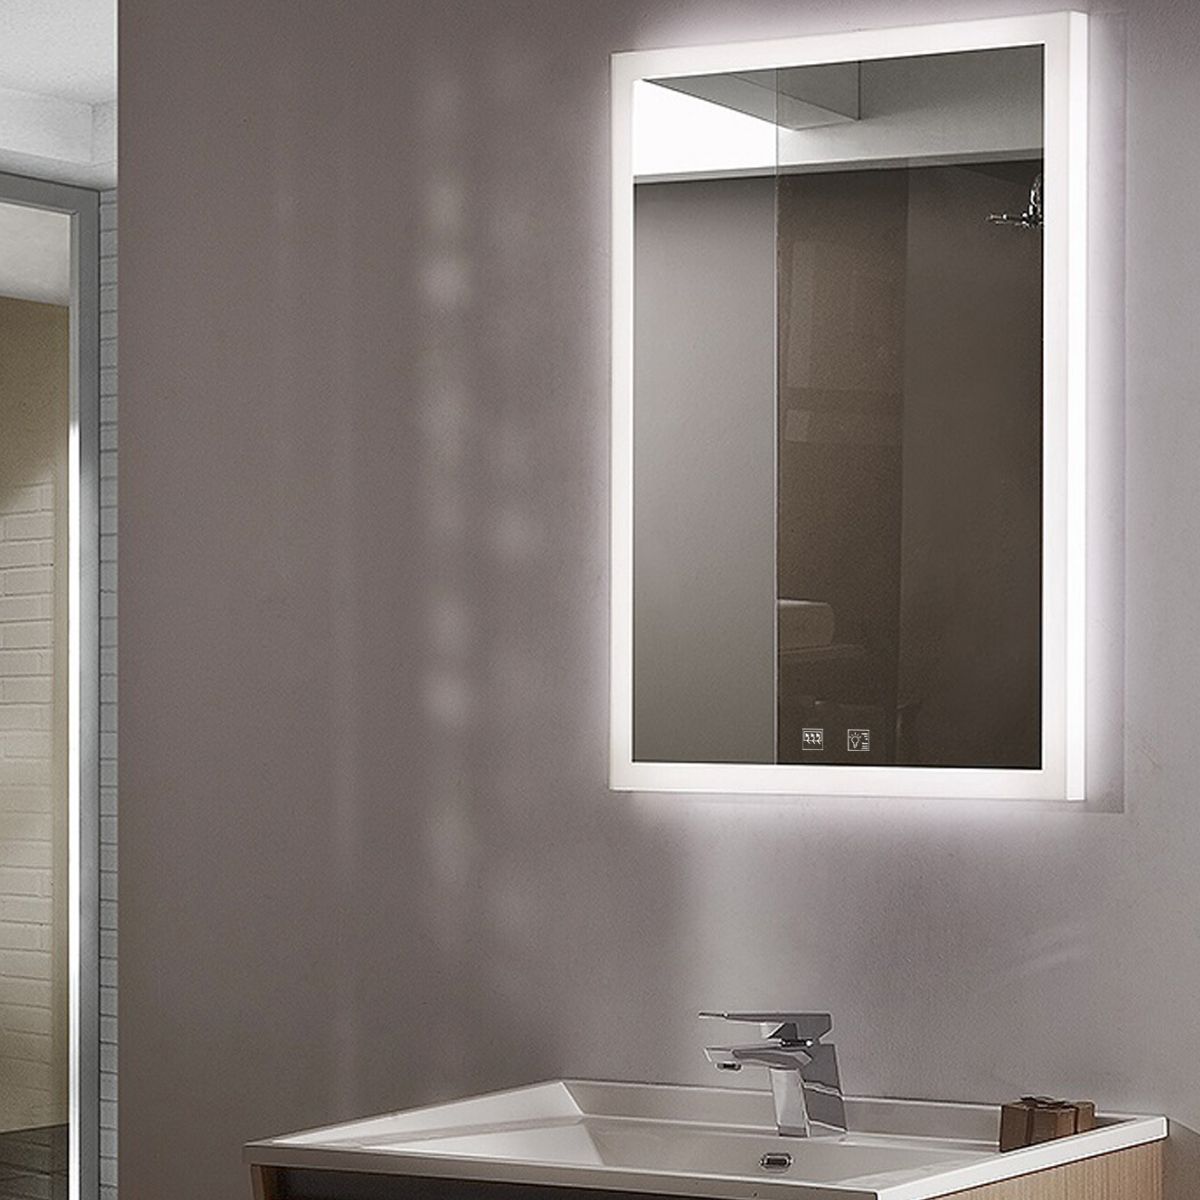 View LED Mirror Colour Adjustable With Demister information